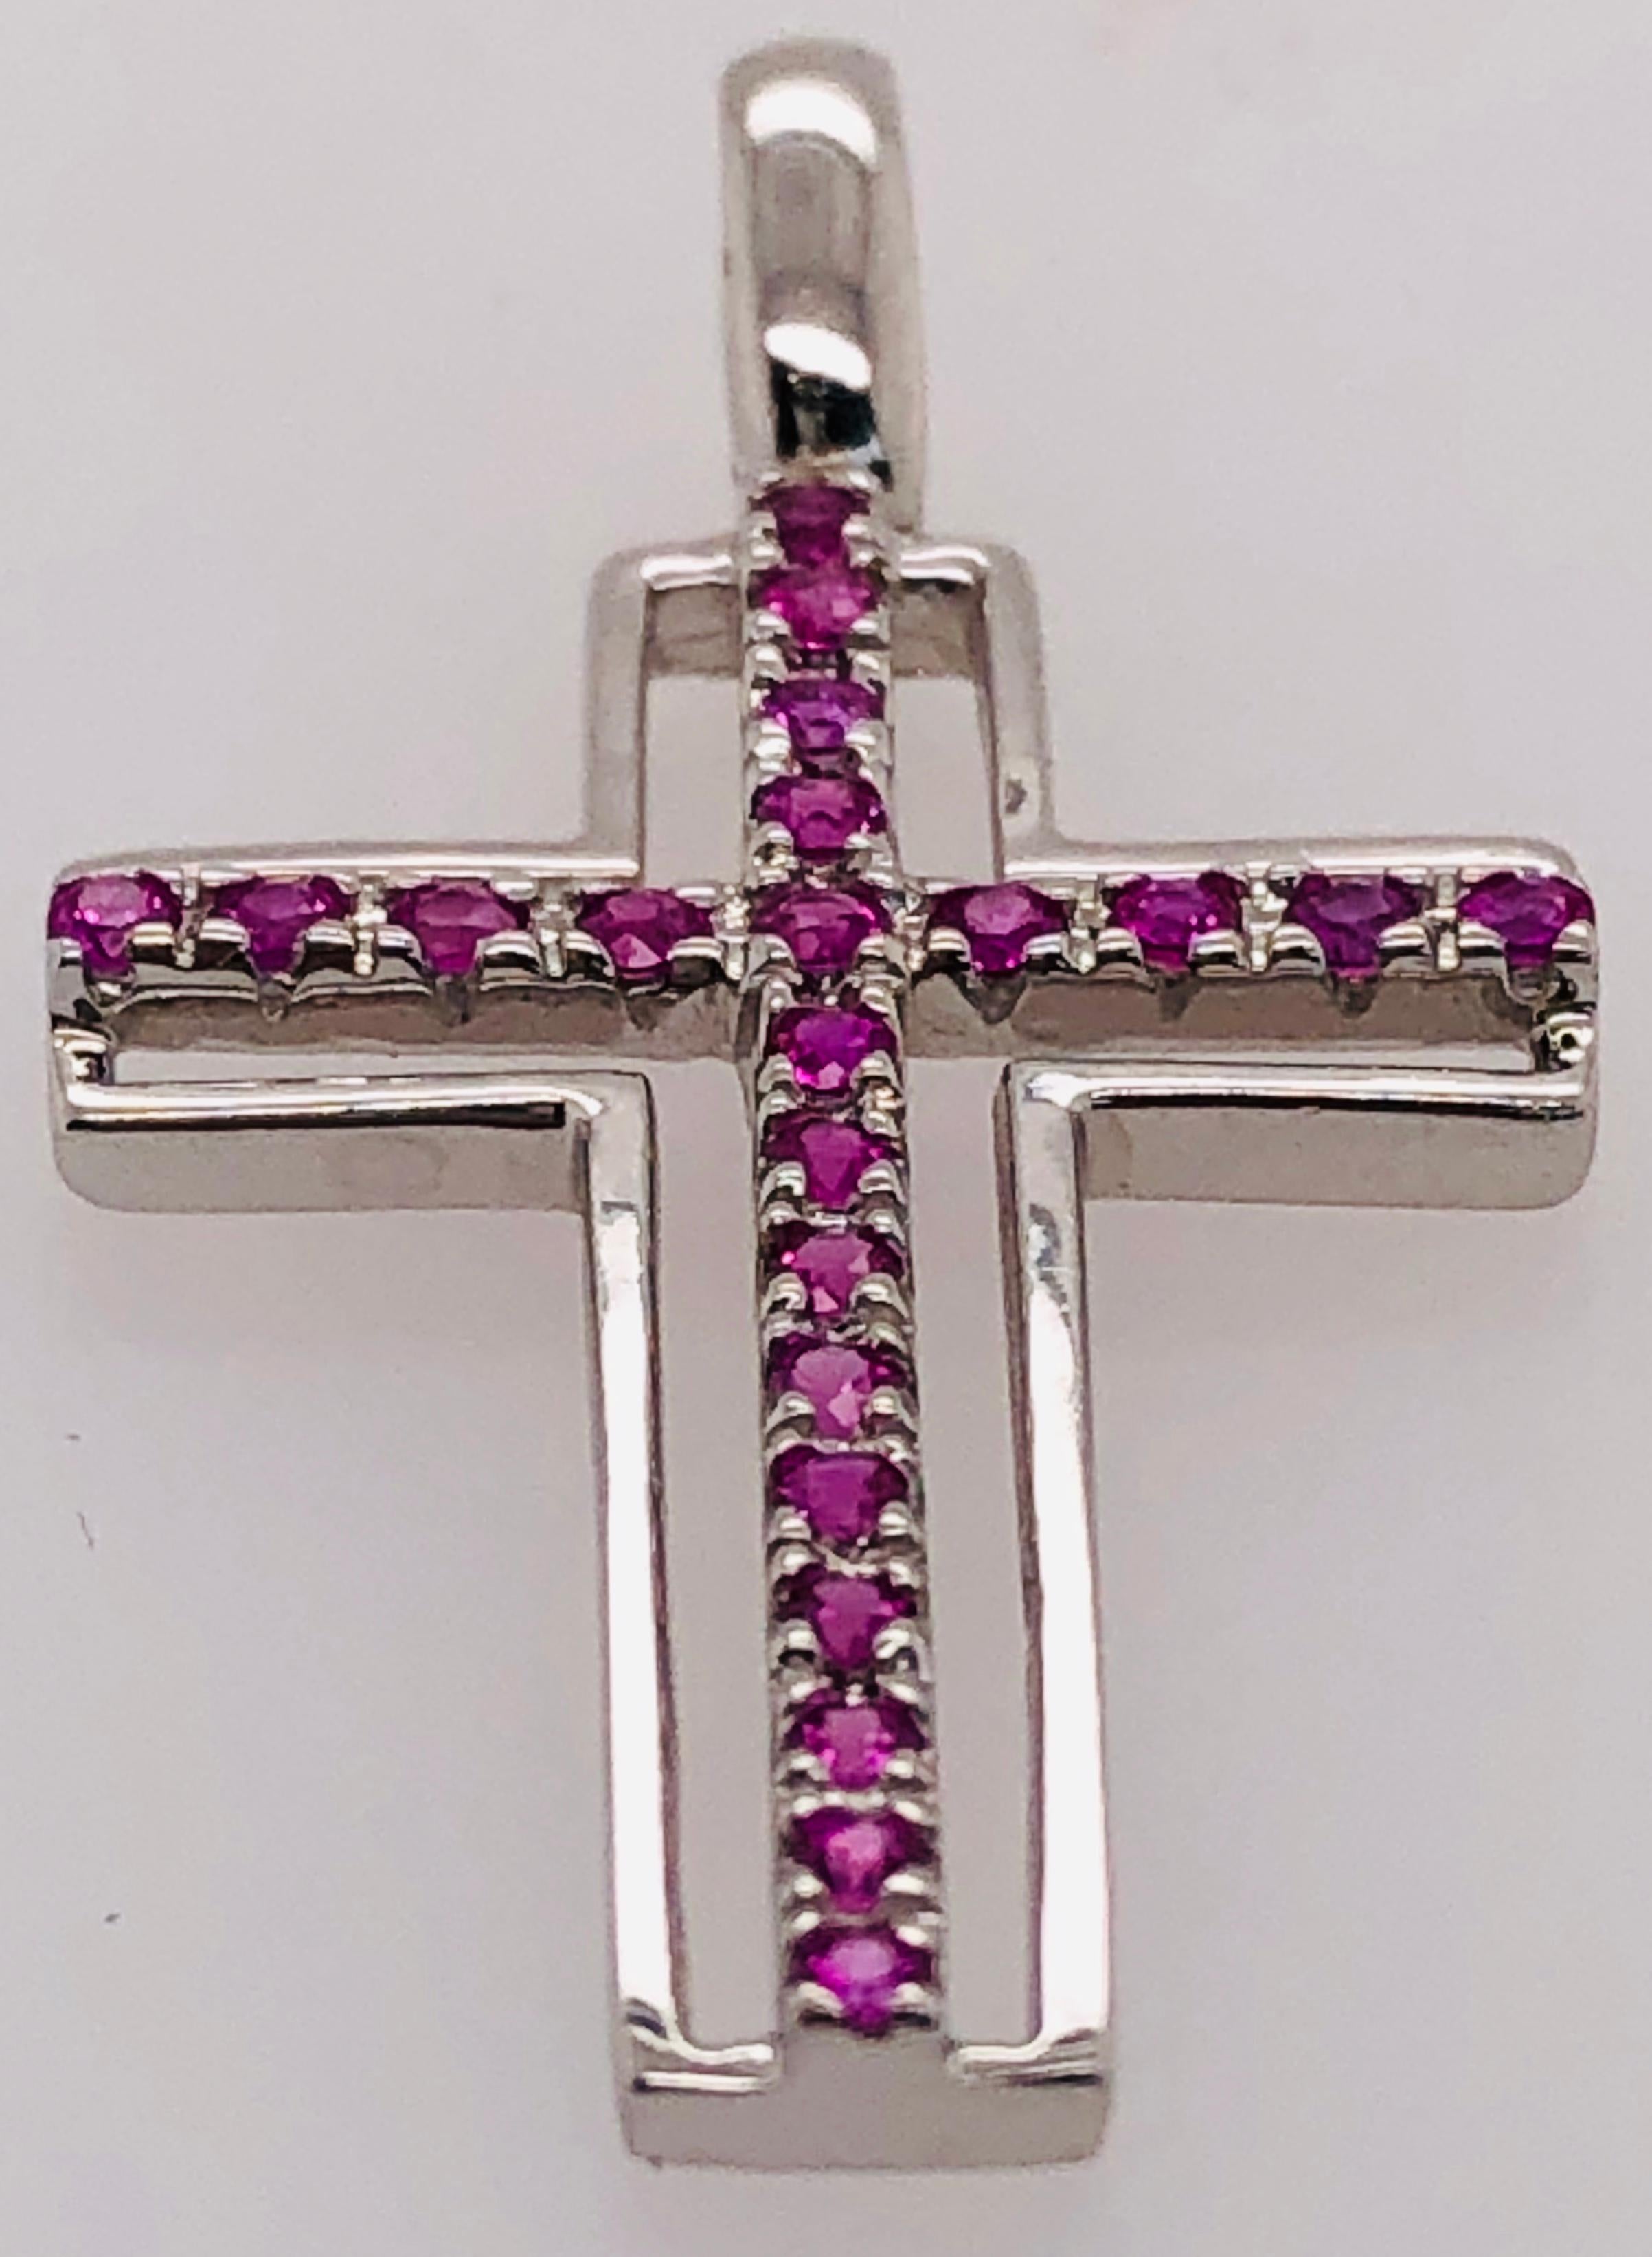 14 Karat White Gold and Pink Topaz Cross Pendant 
0.38 Total Weight of Stones
1.96 grams total weight.